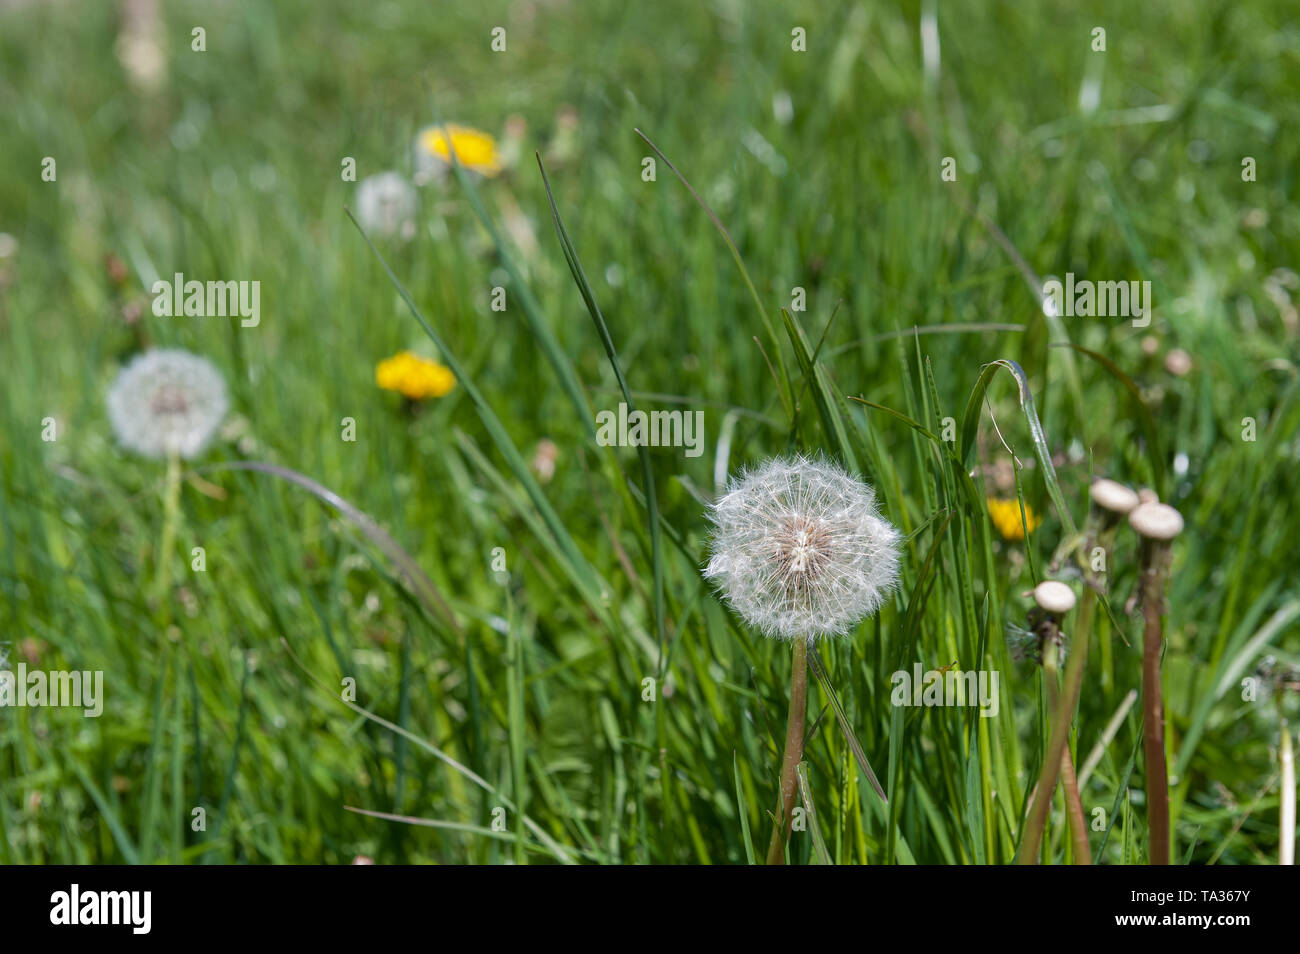 The bright yellow flowers and ‘clock’ seedheads of dandelion, Taraxacum officinalis, grow quickly in a lawn in need of cutting Stock Photo